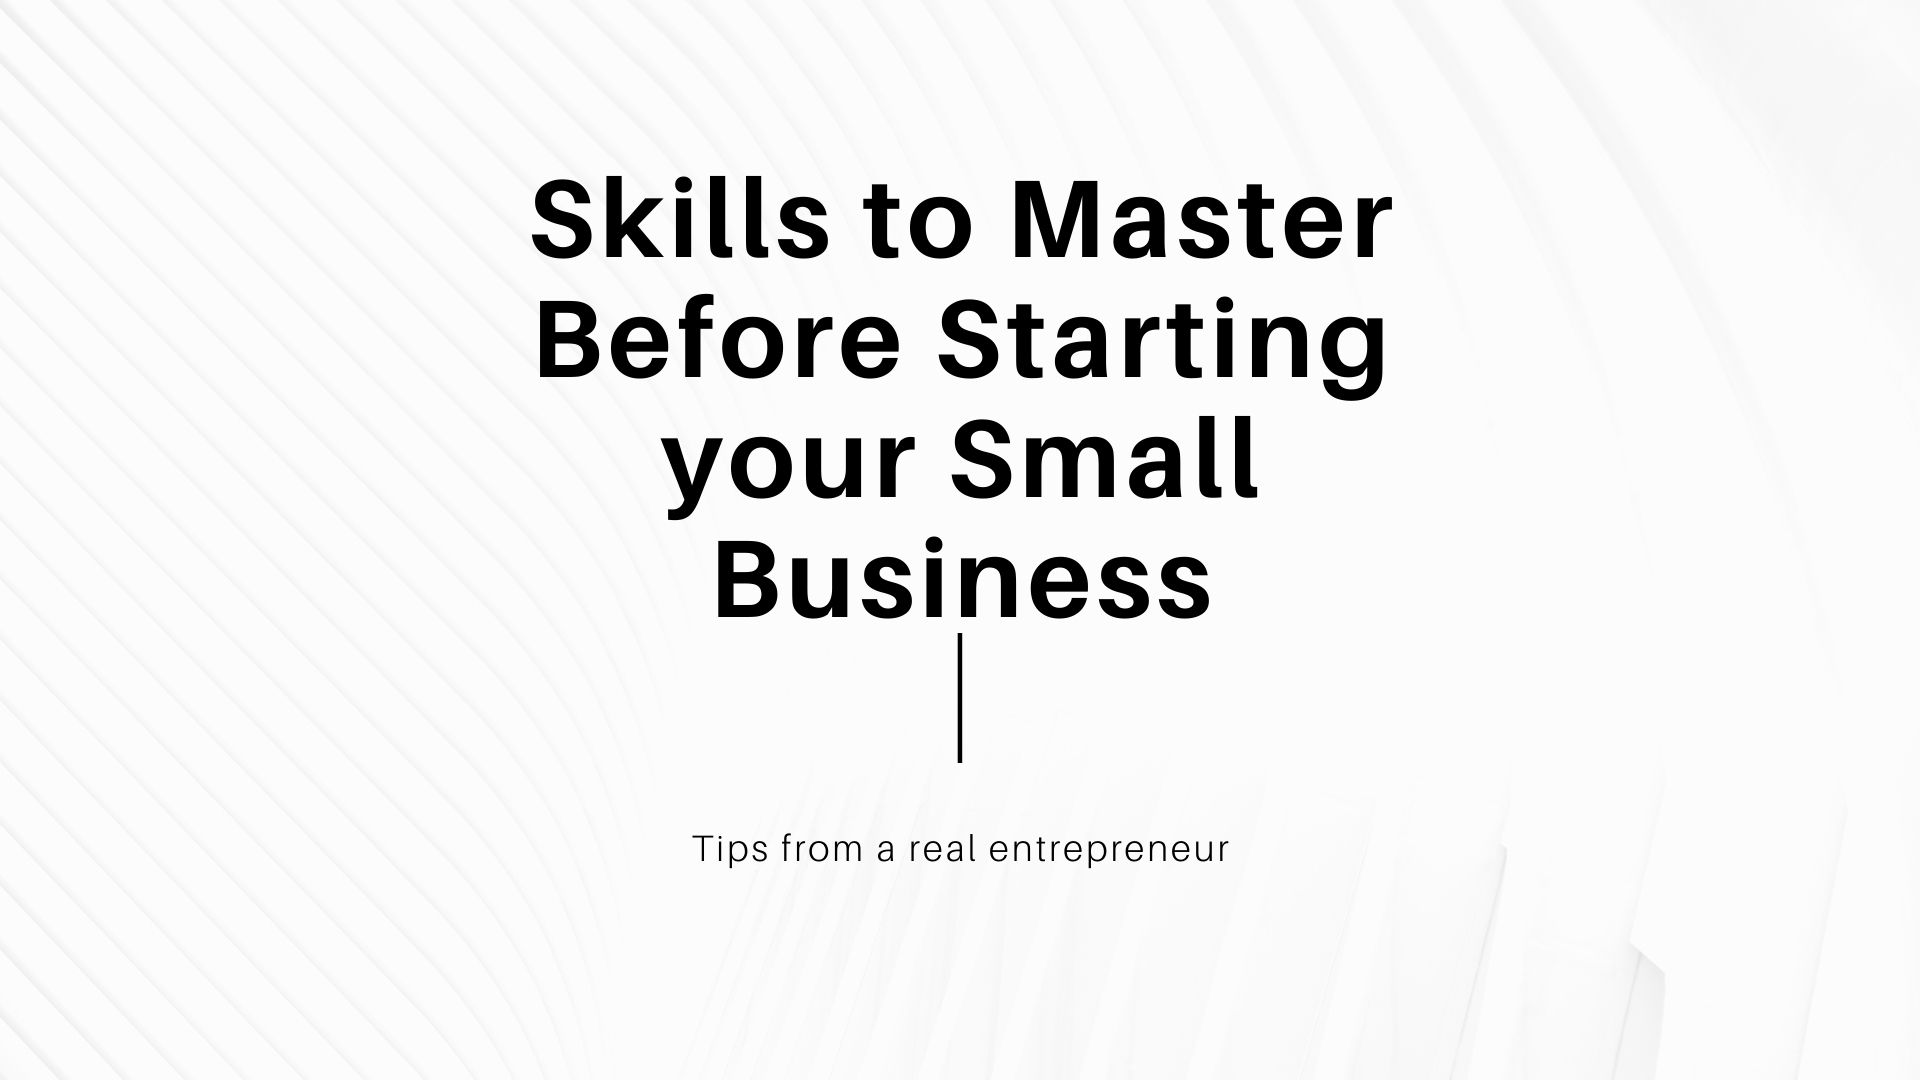 Skills to Master Before Starting your Small Business